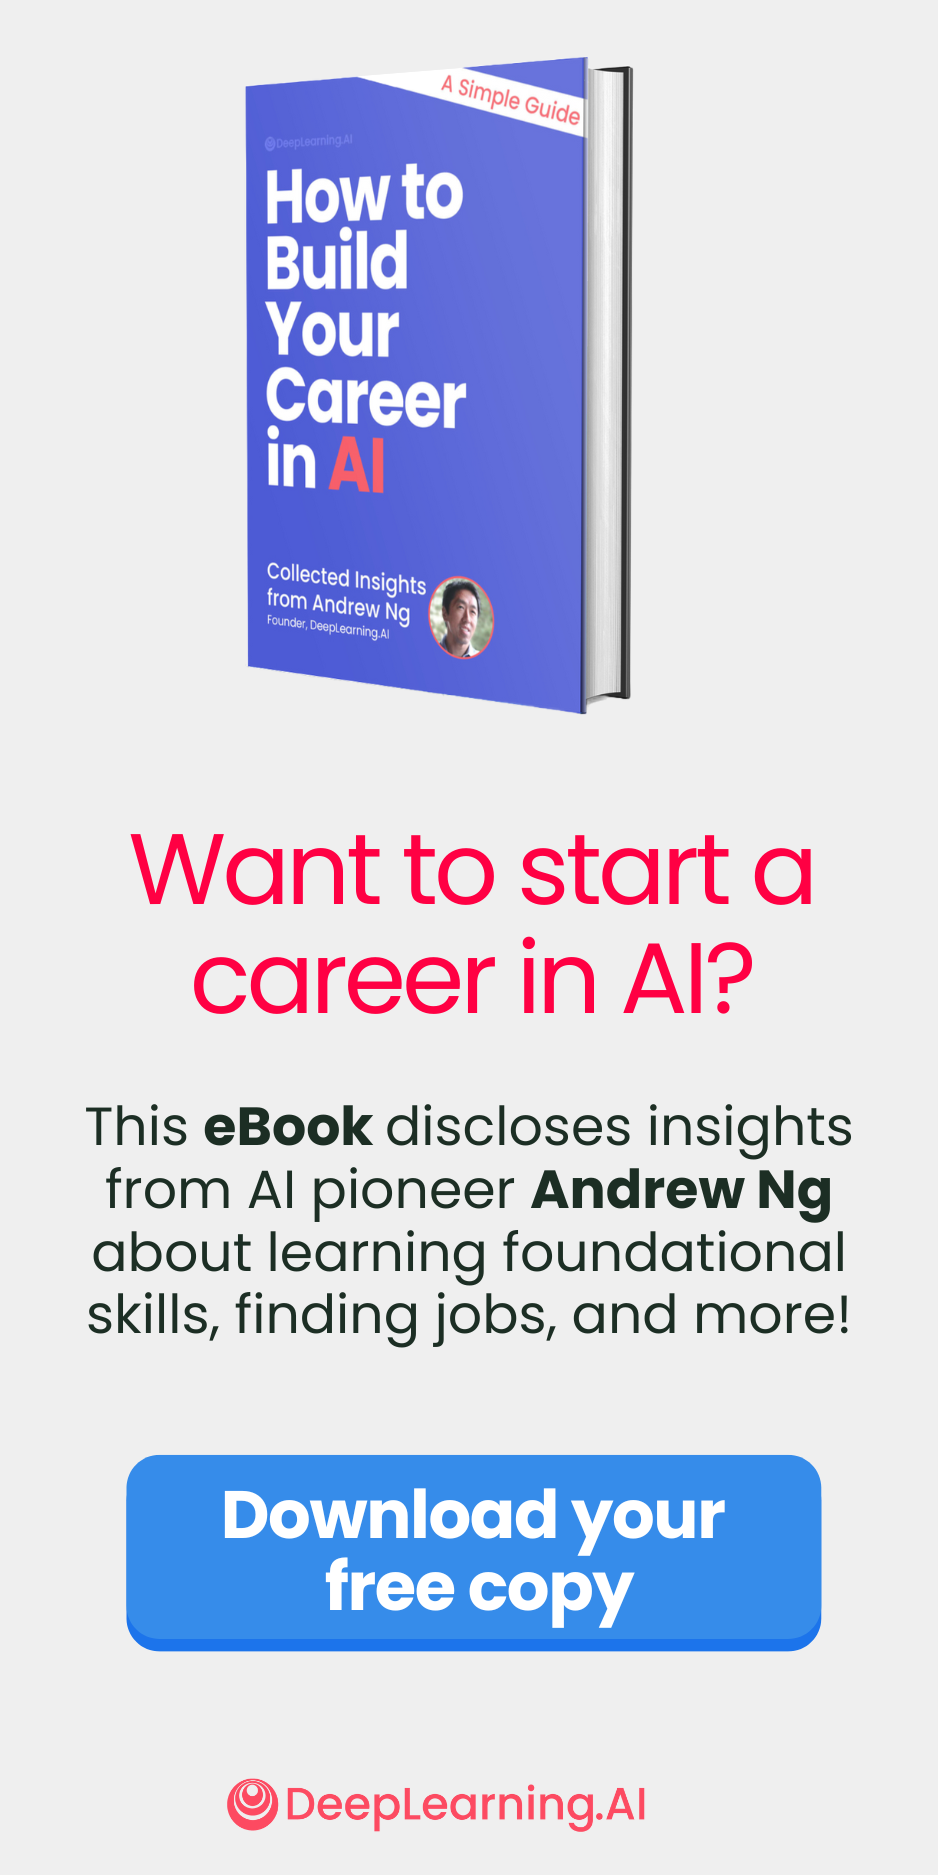 Want to start a career in AI? This eBook discloses insights from AI pioneer Andrew Ng about learning foundational skills, finding jobs, and more!